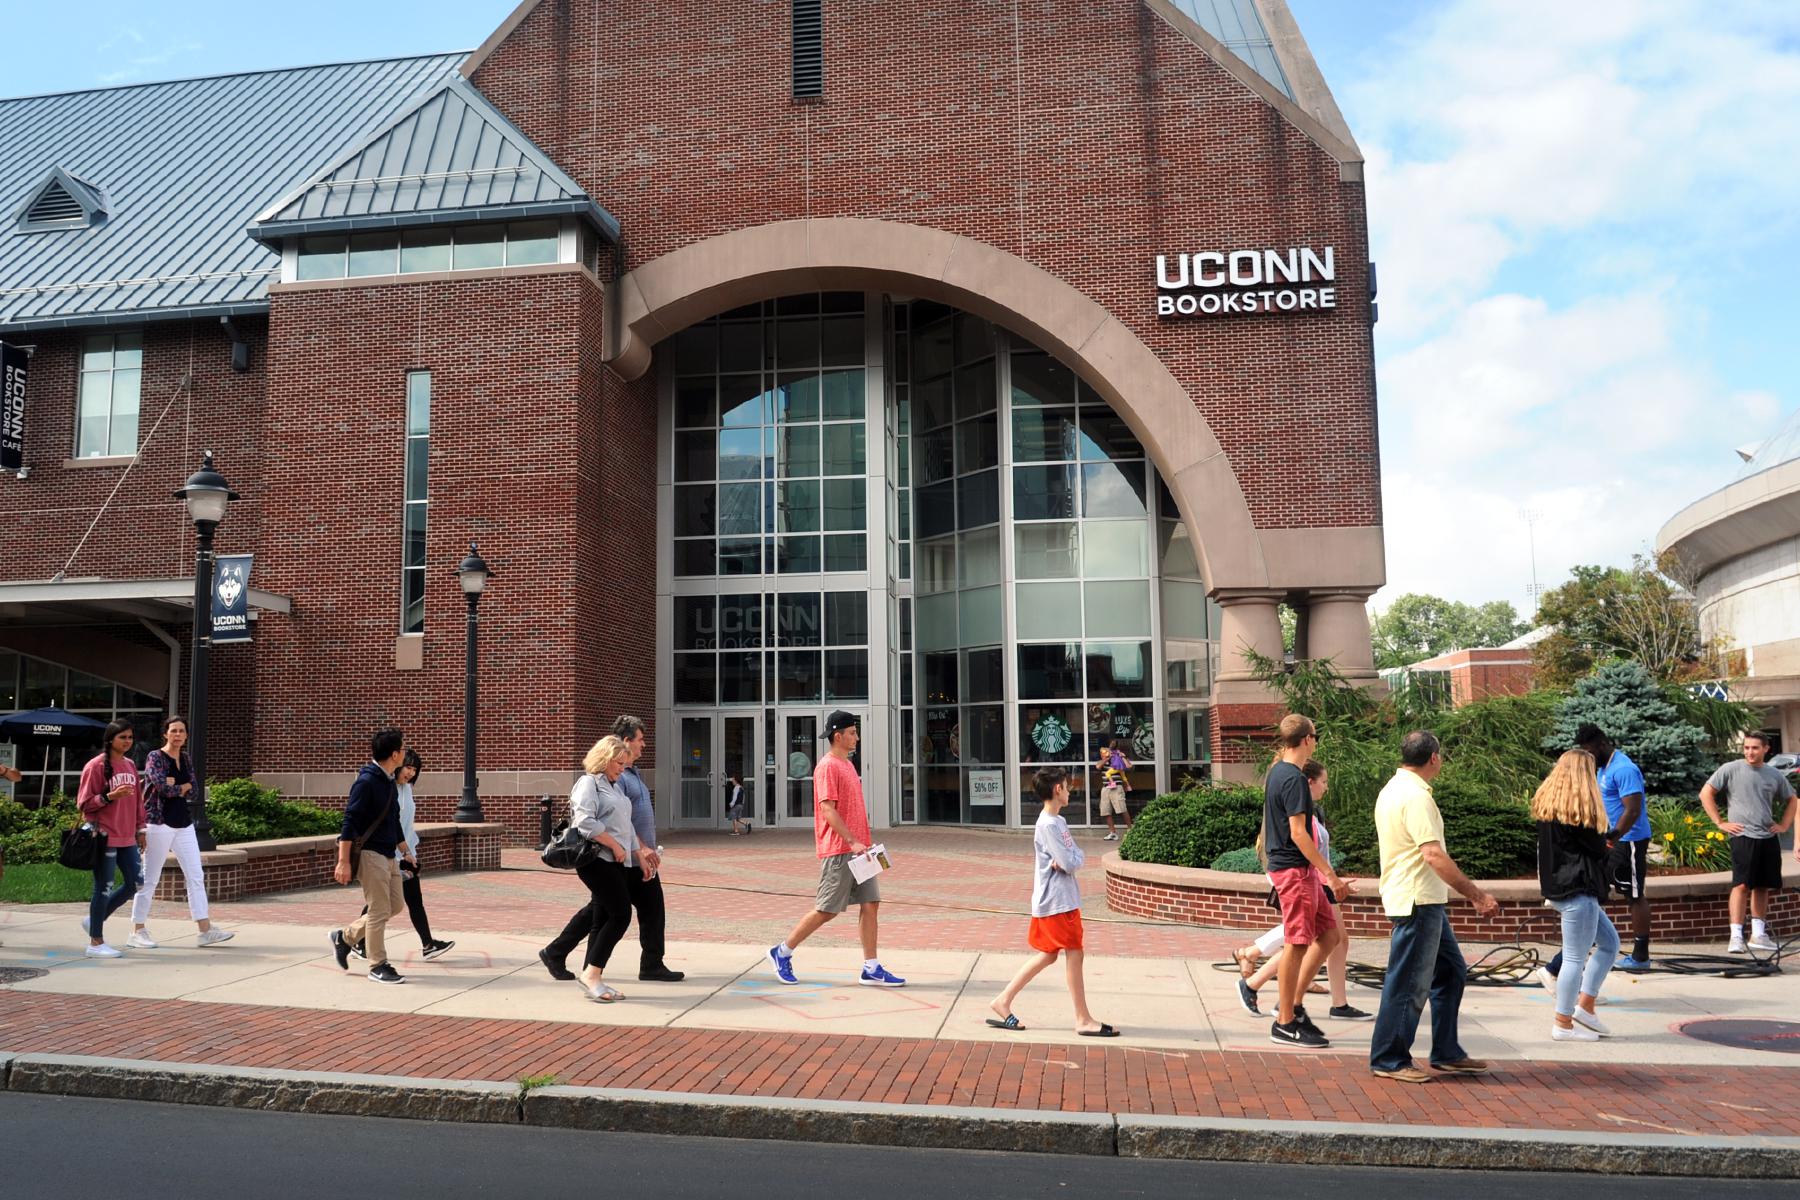 UConn proposes $3,000 tuition increase over next 5 years